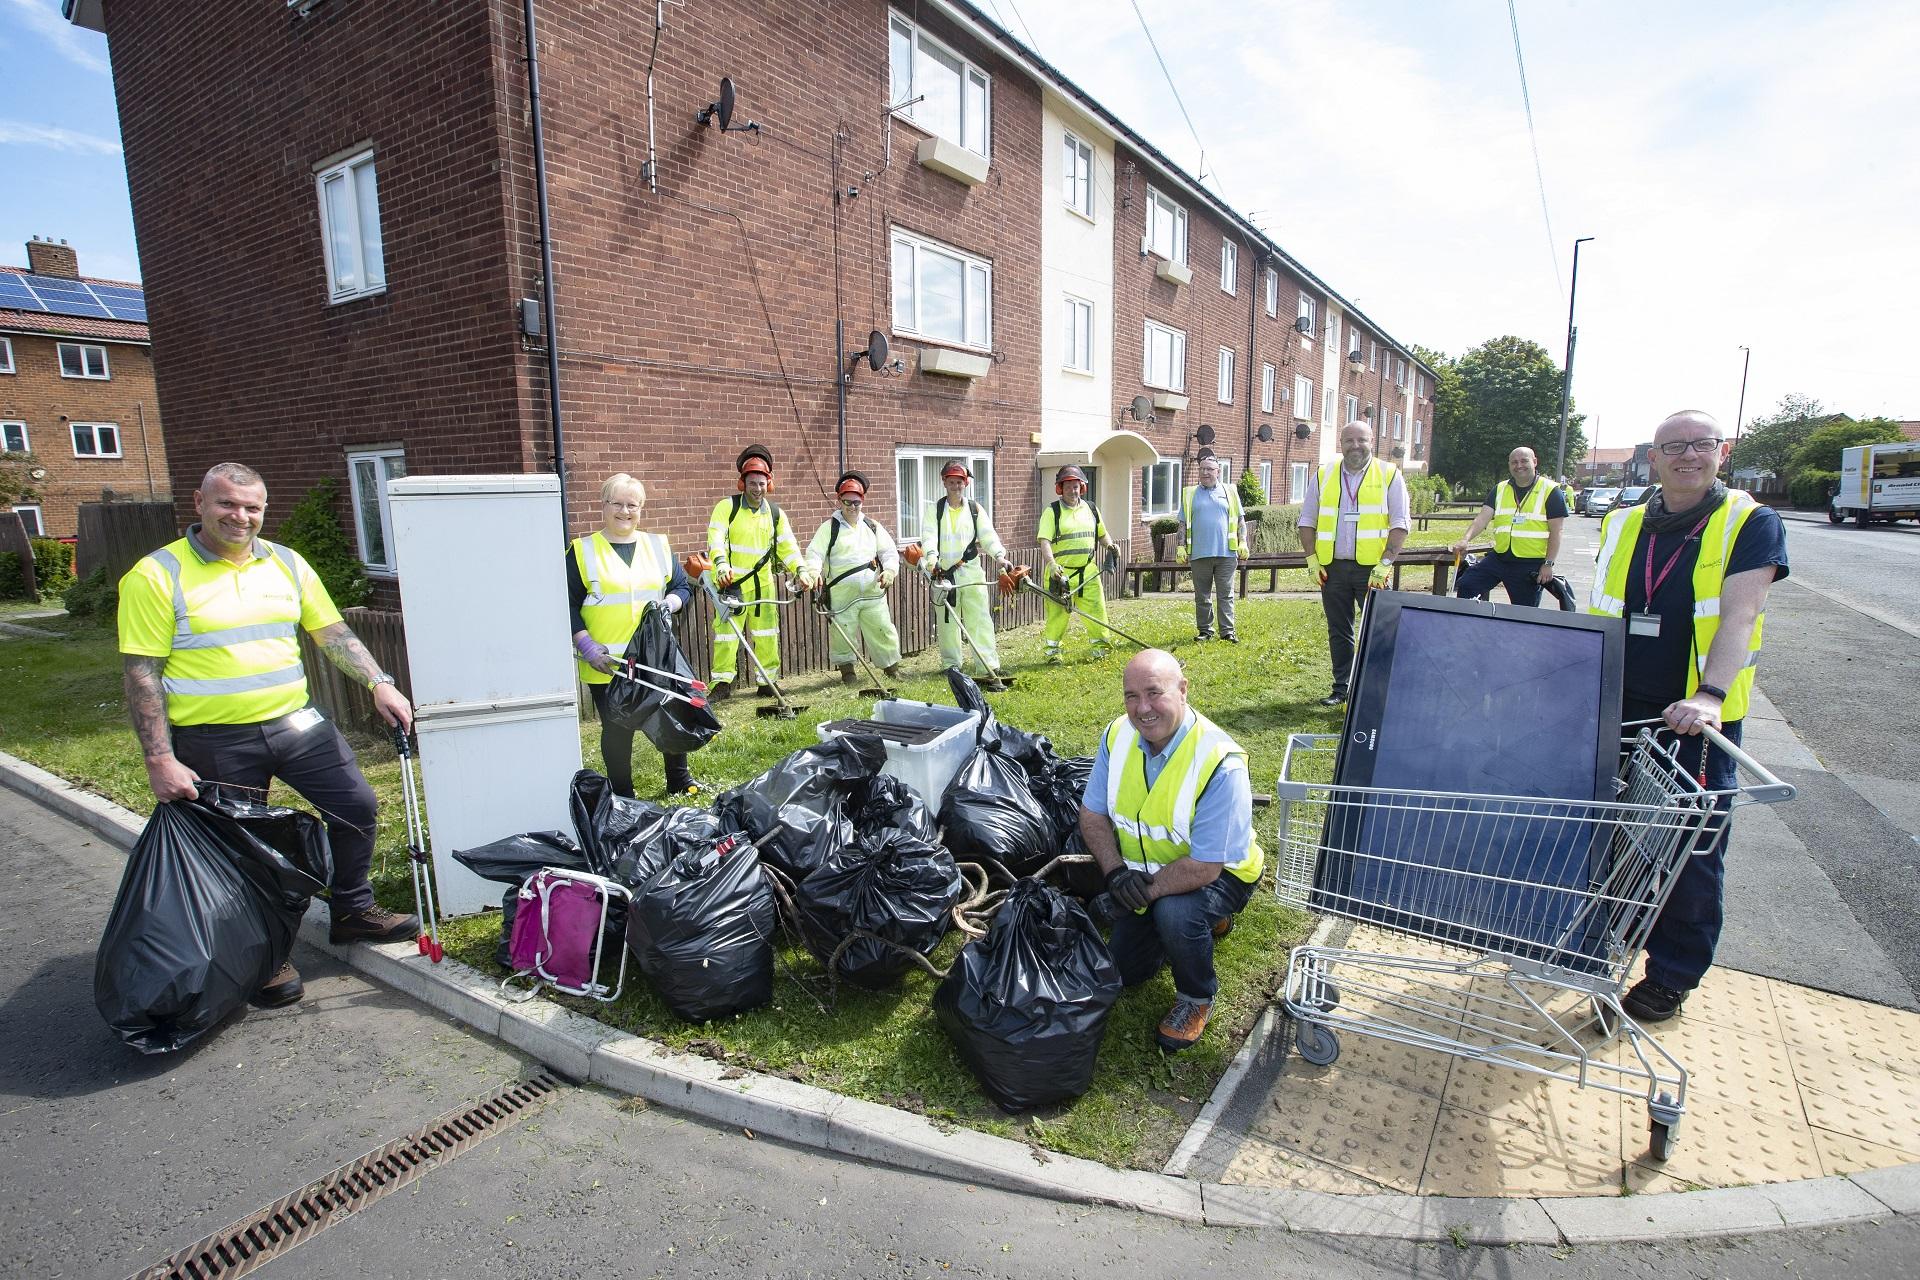 Cllr Ged Bell with staff from Newcastle City Council's local services department alongside bags of rubbish, a flytipped fridge freezer and tv, in Kenton